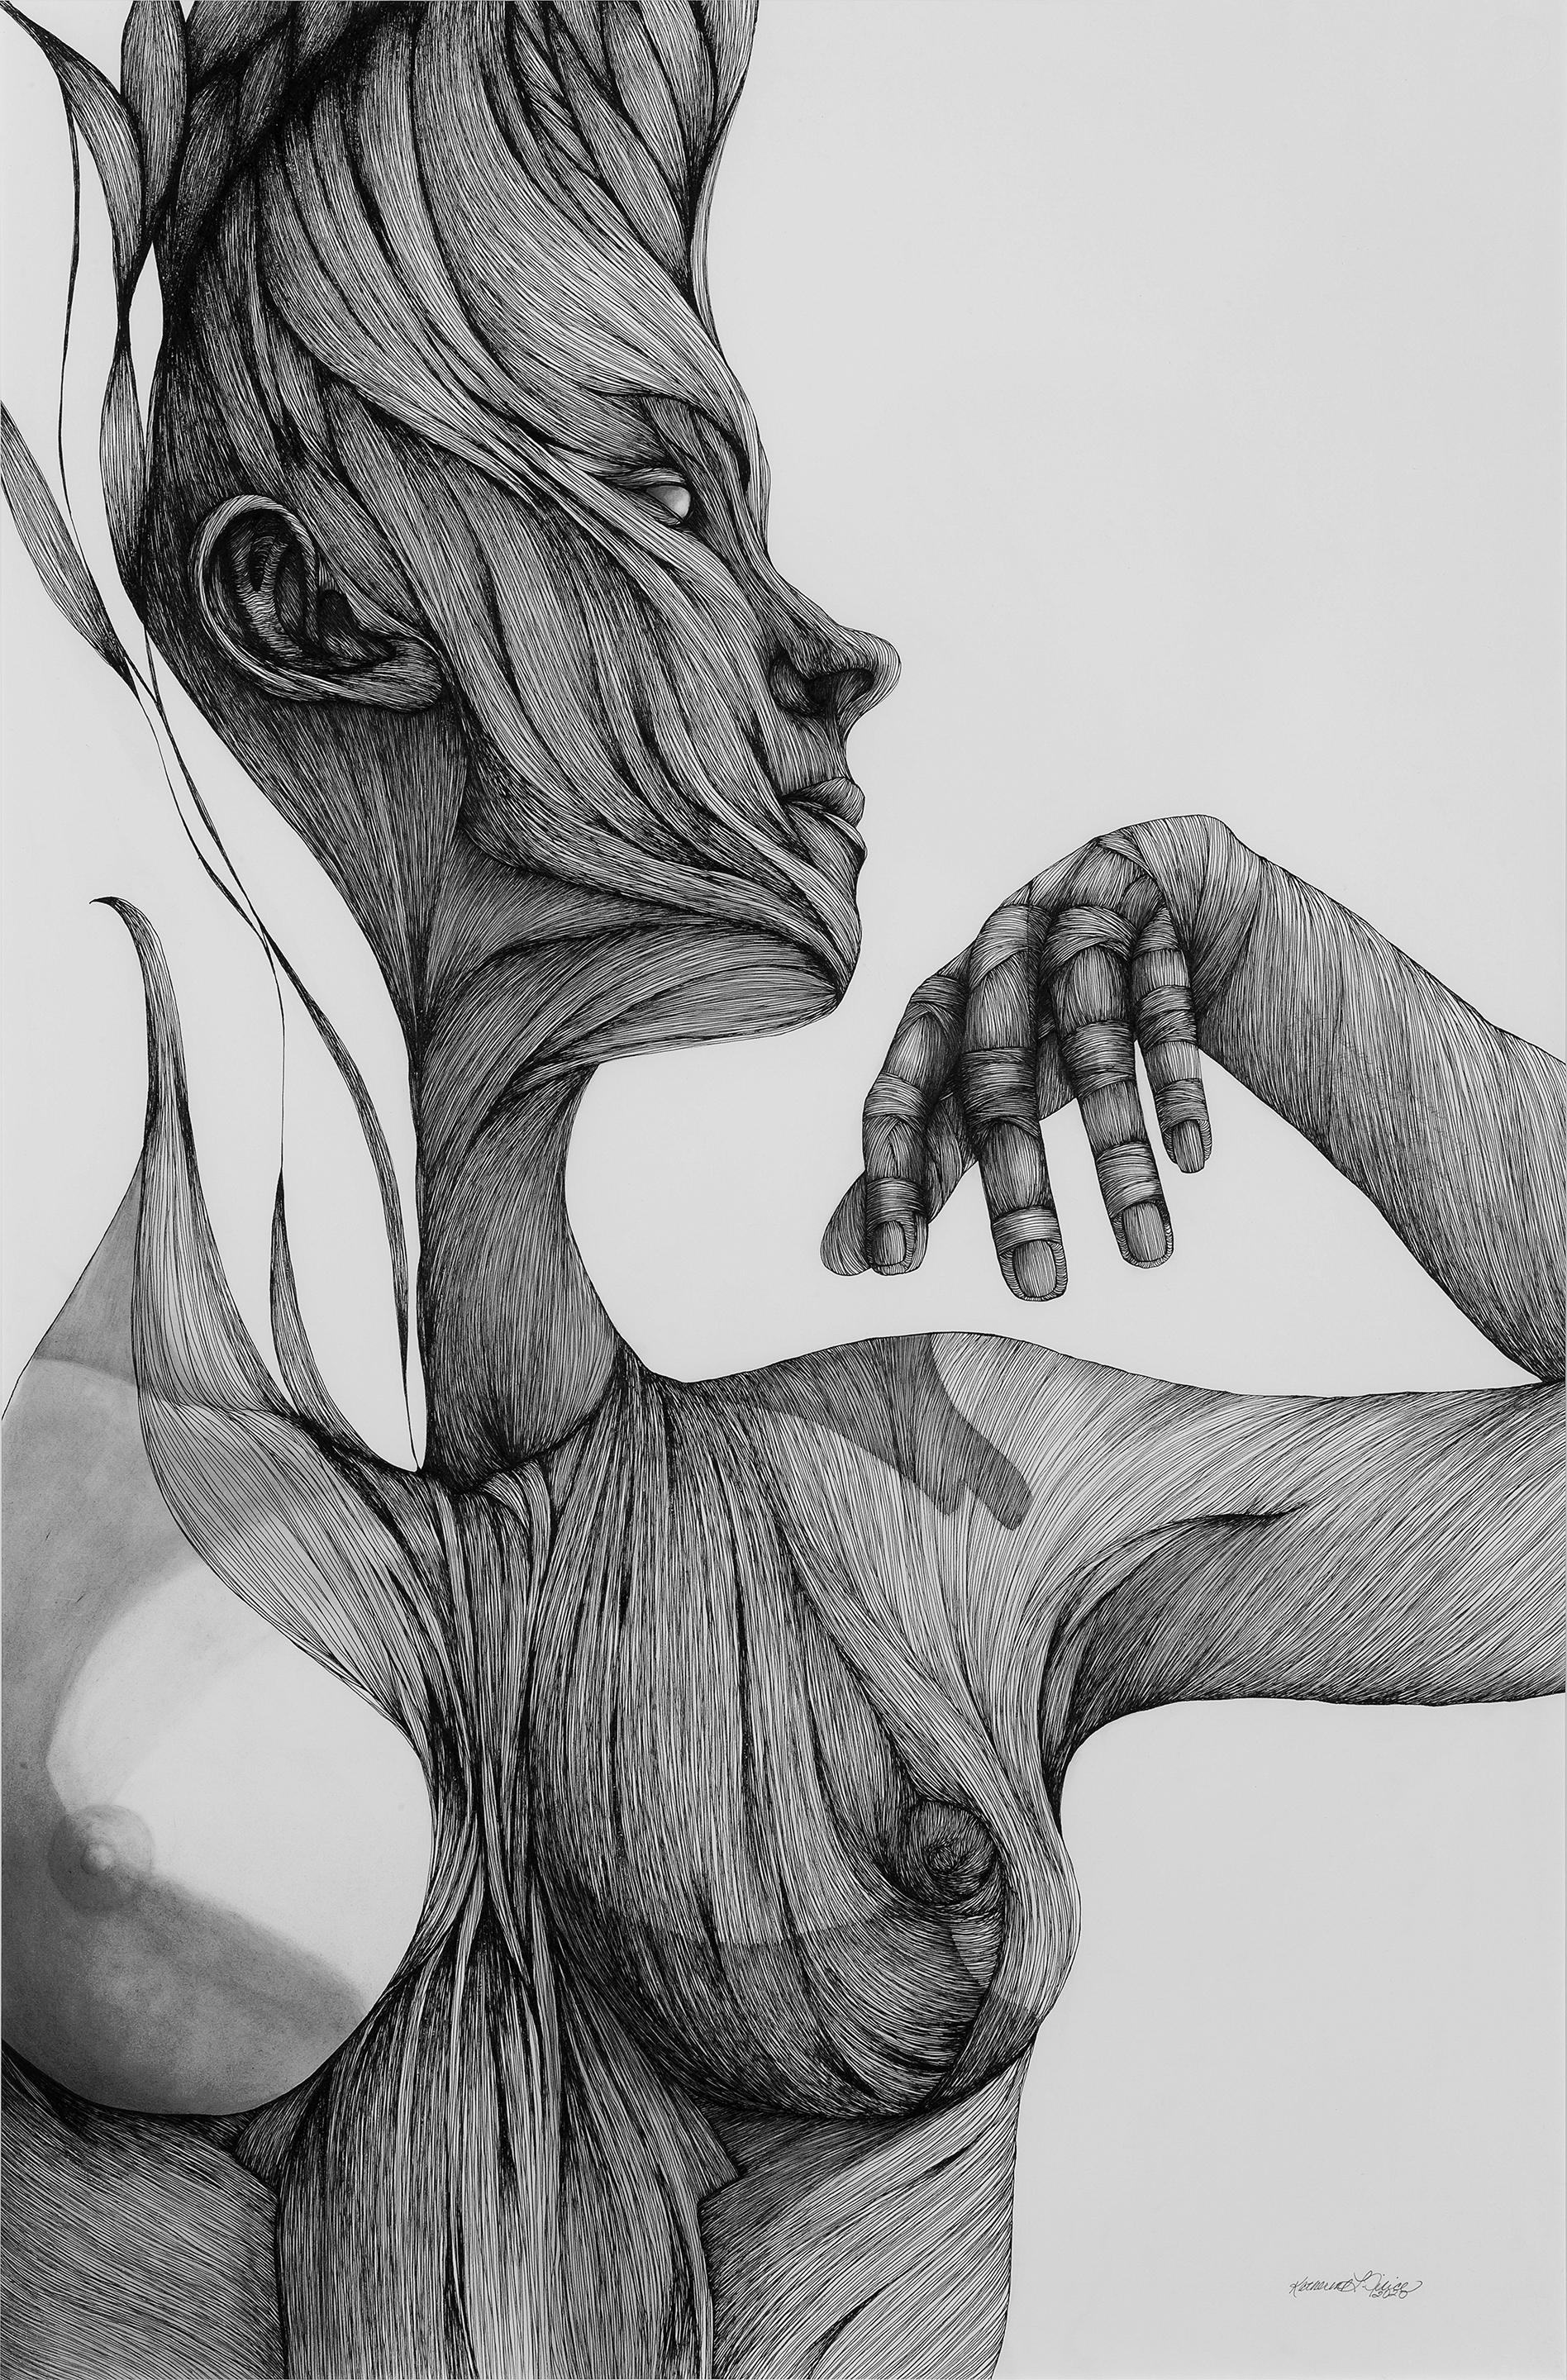 Ether - Pen, Ink, Black White Drawing of Female Figure - Art by Katherine Filice